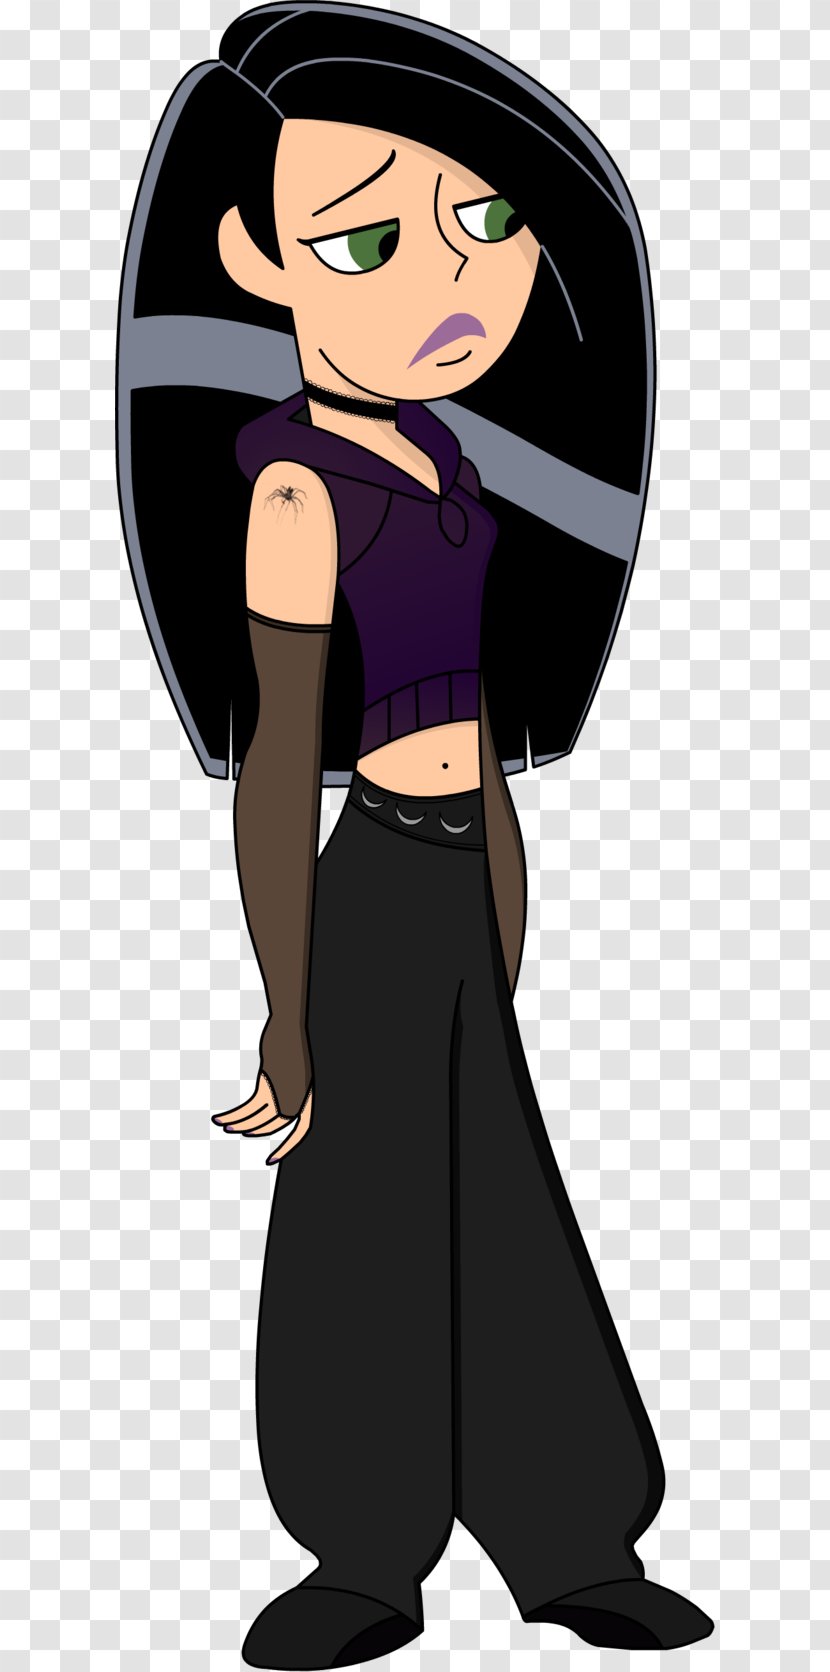 Kim Possible Ron Stoppable Goth Subculture Black Hair Moral Character - Silhouette Transparent PNG